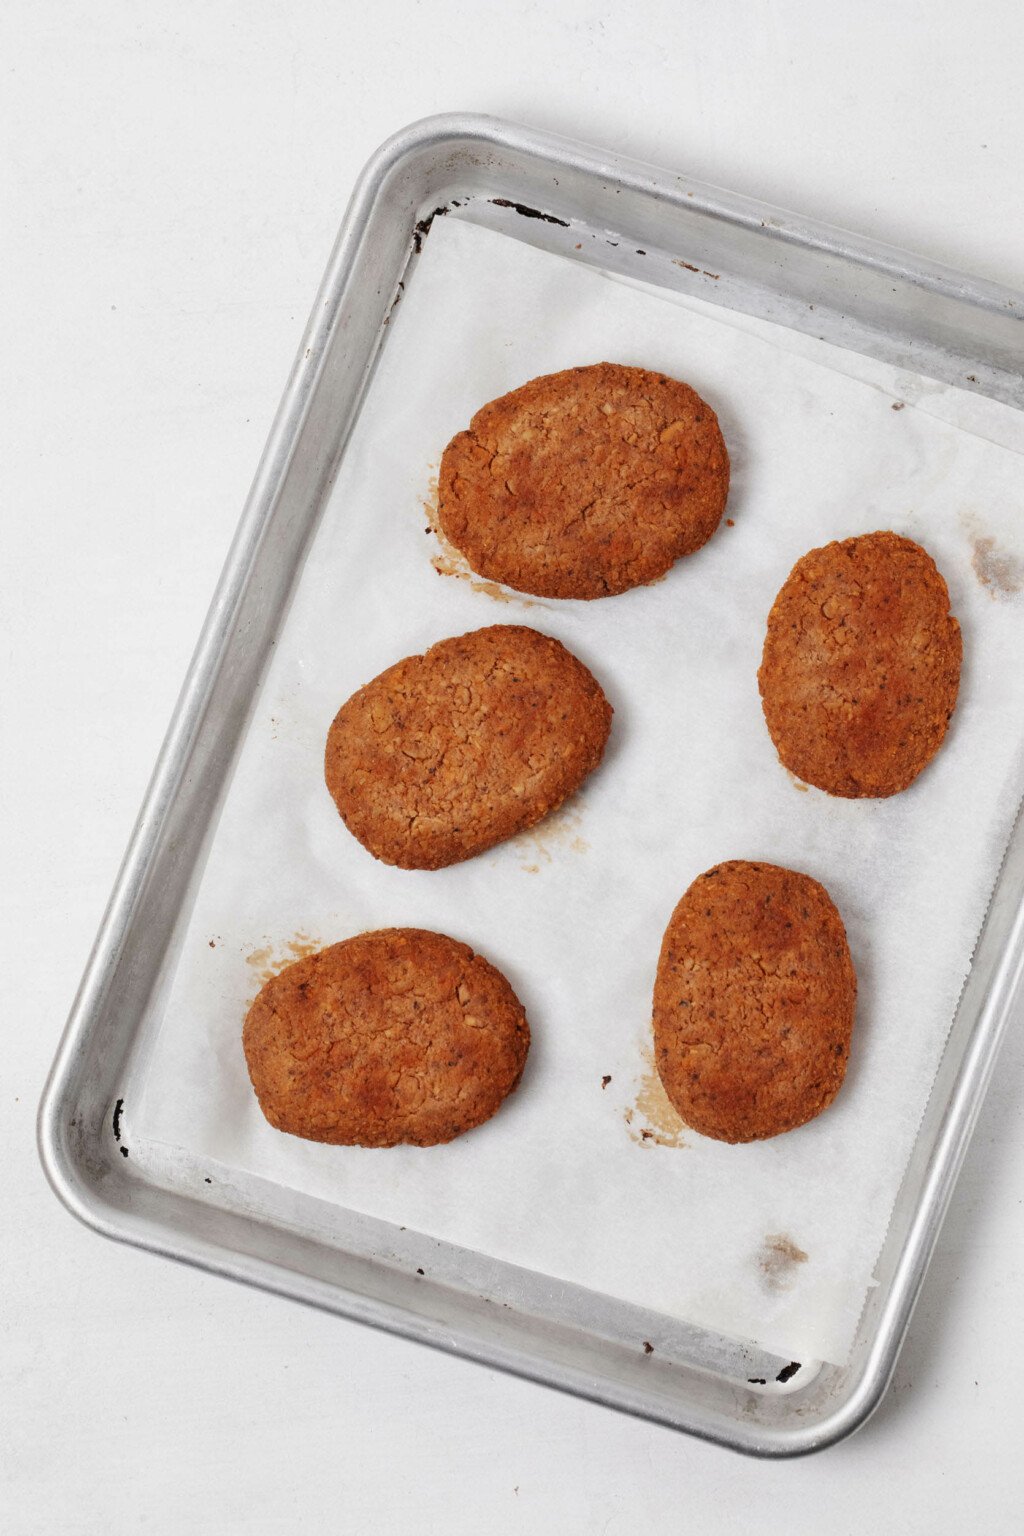 Patties of tempeh, which have been formed to look like mini "steaks," are laid on parchment on a baking sheet.